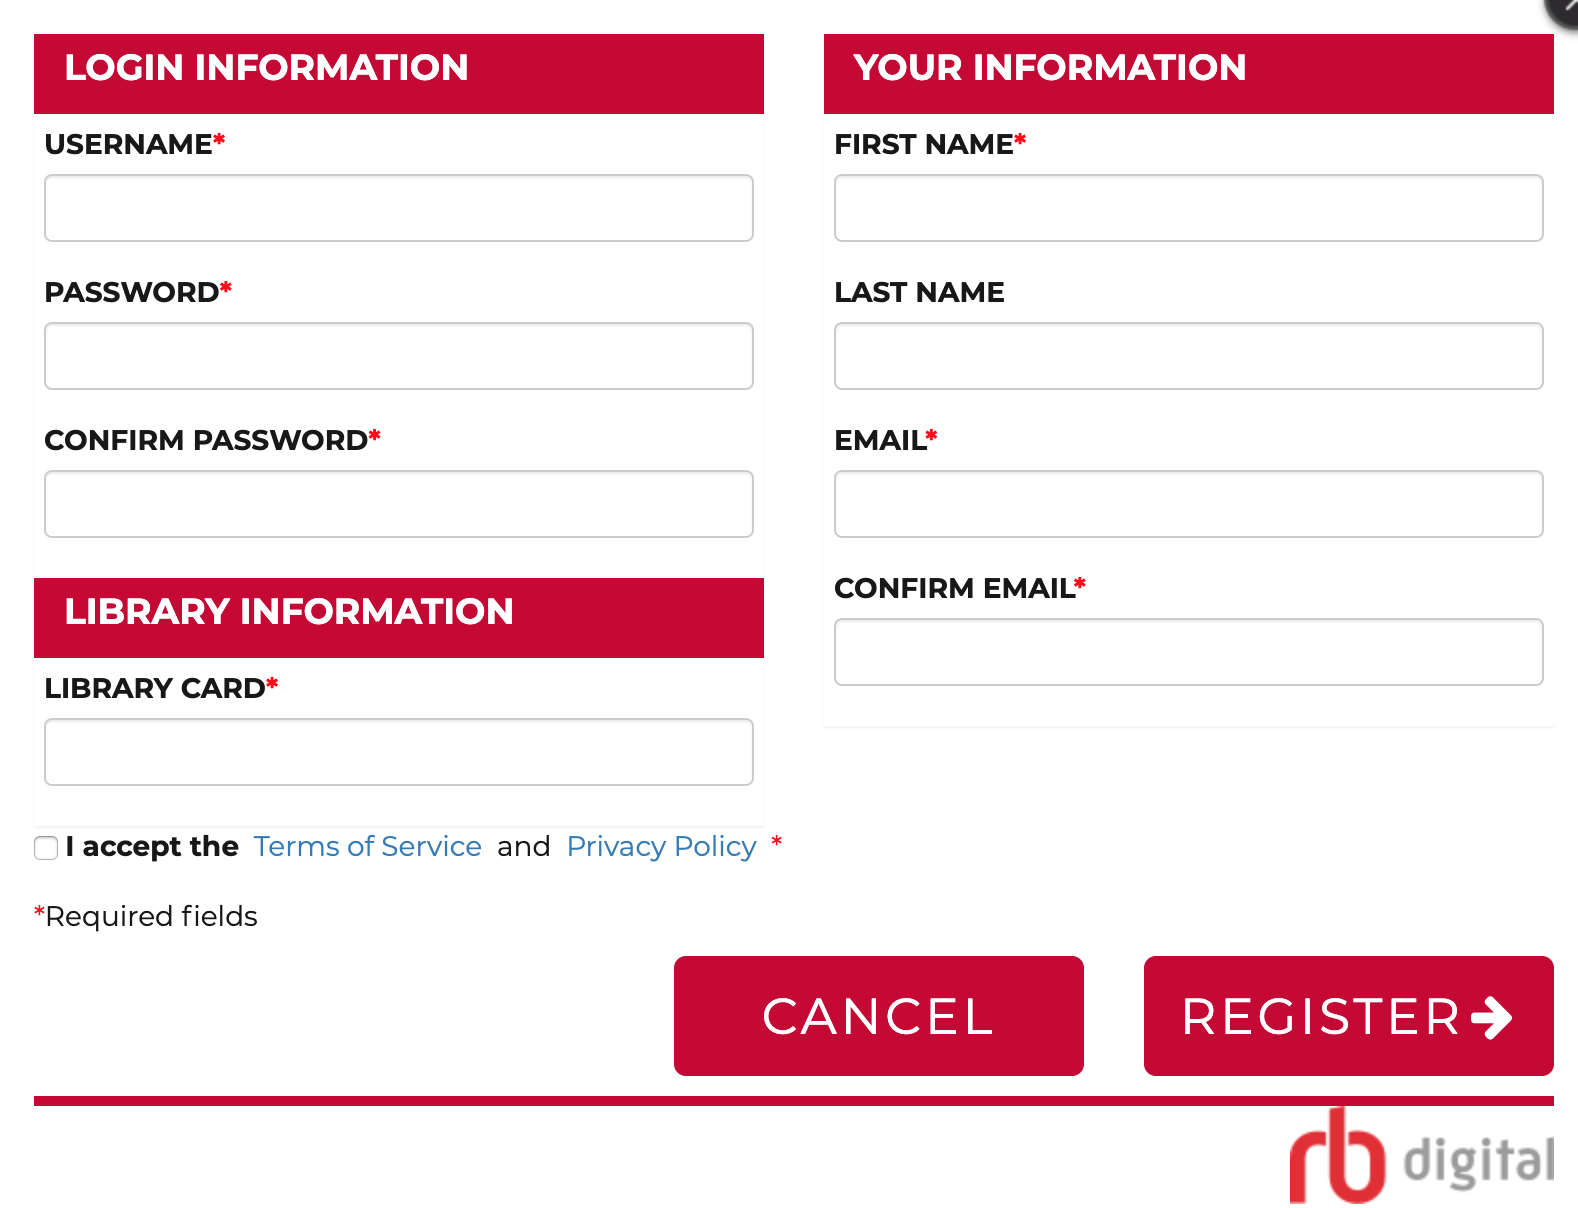 the log-in page to RB Digital, which asks for a username, password, email and library card number.